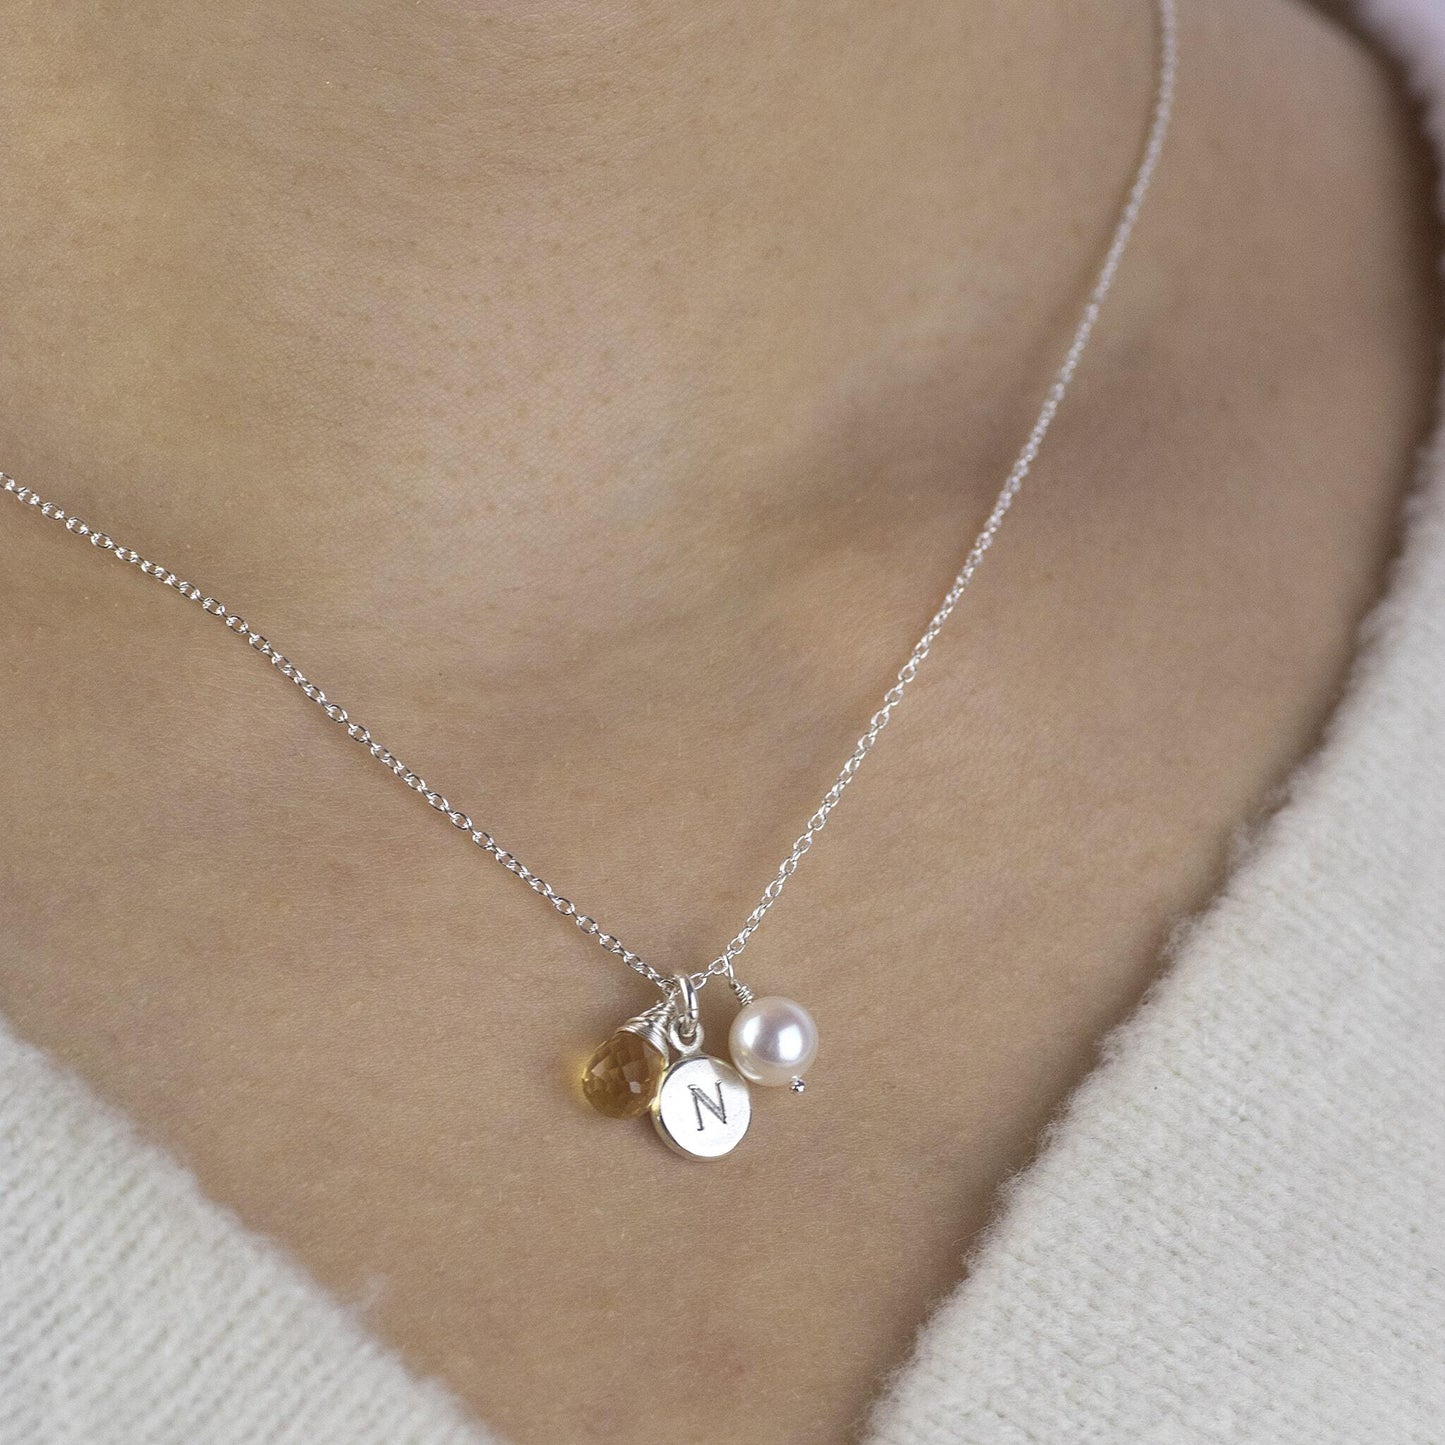 Engraved Initial Birthstone Necklace